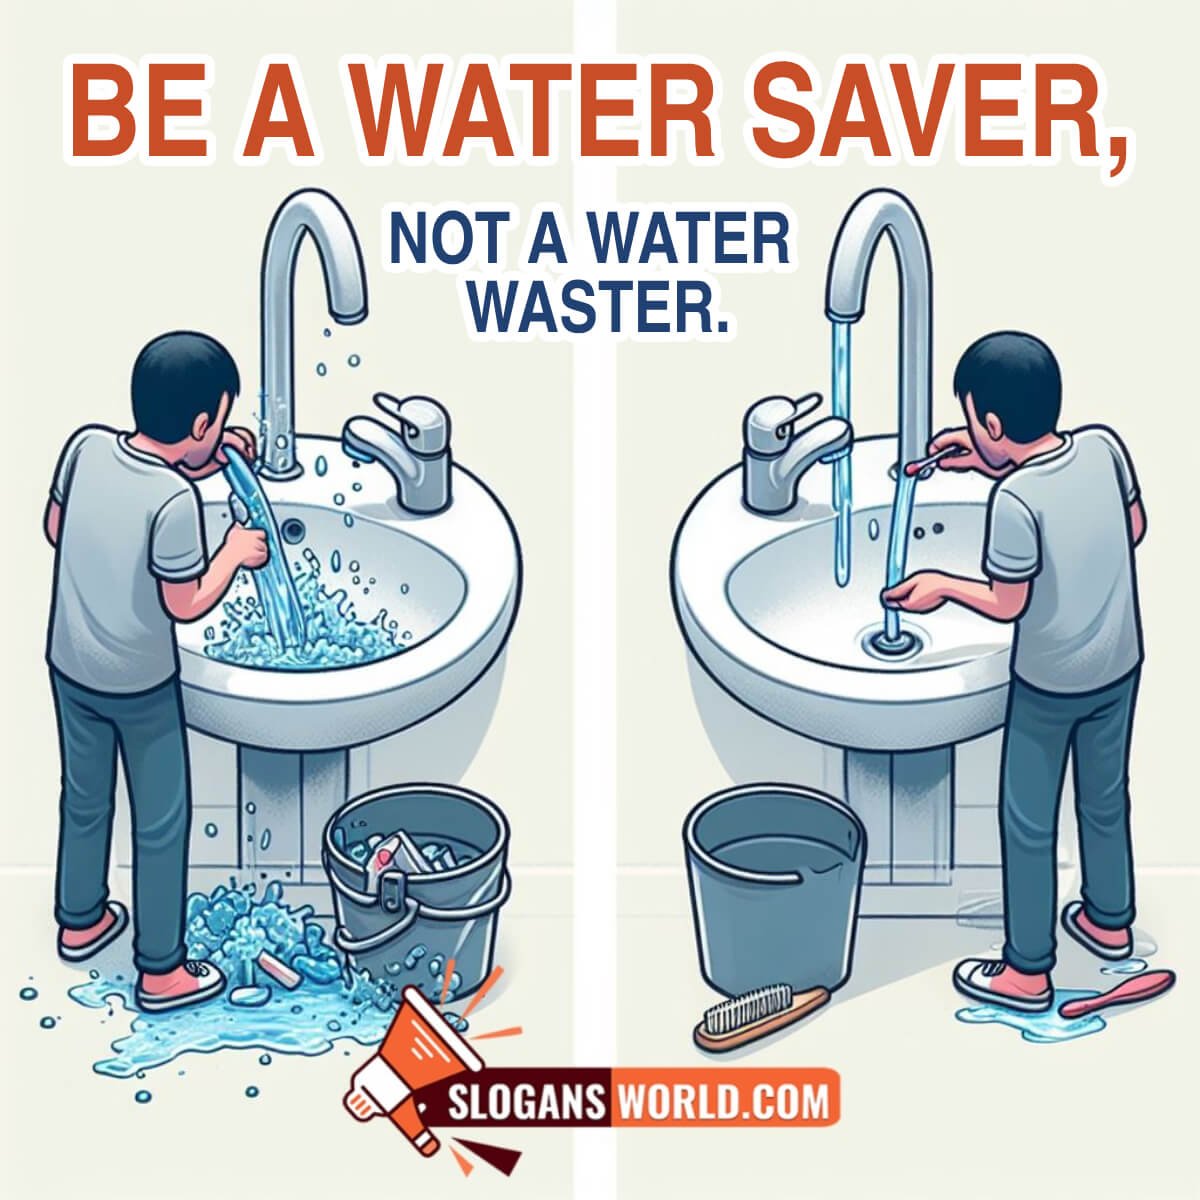 Be A Water Saver, Not A Water Waster.